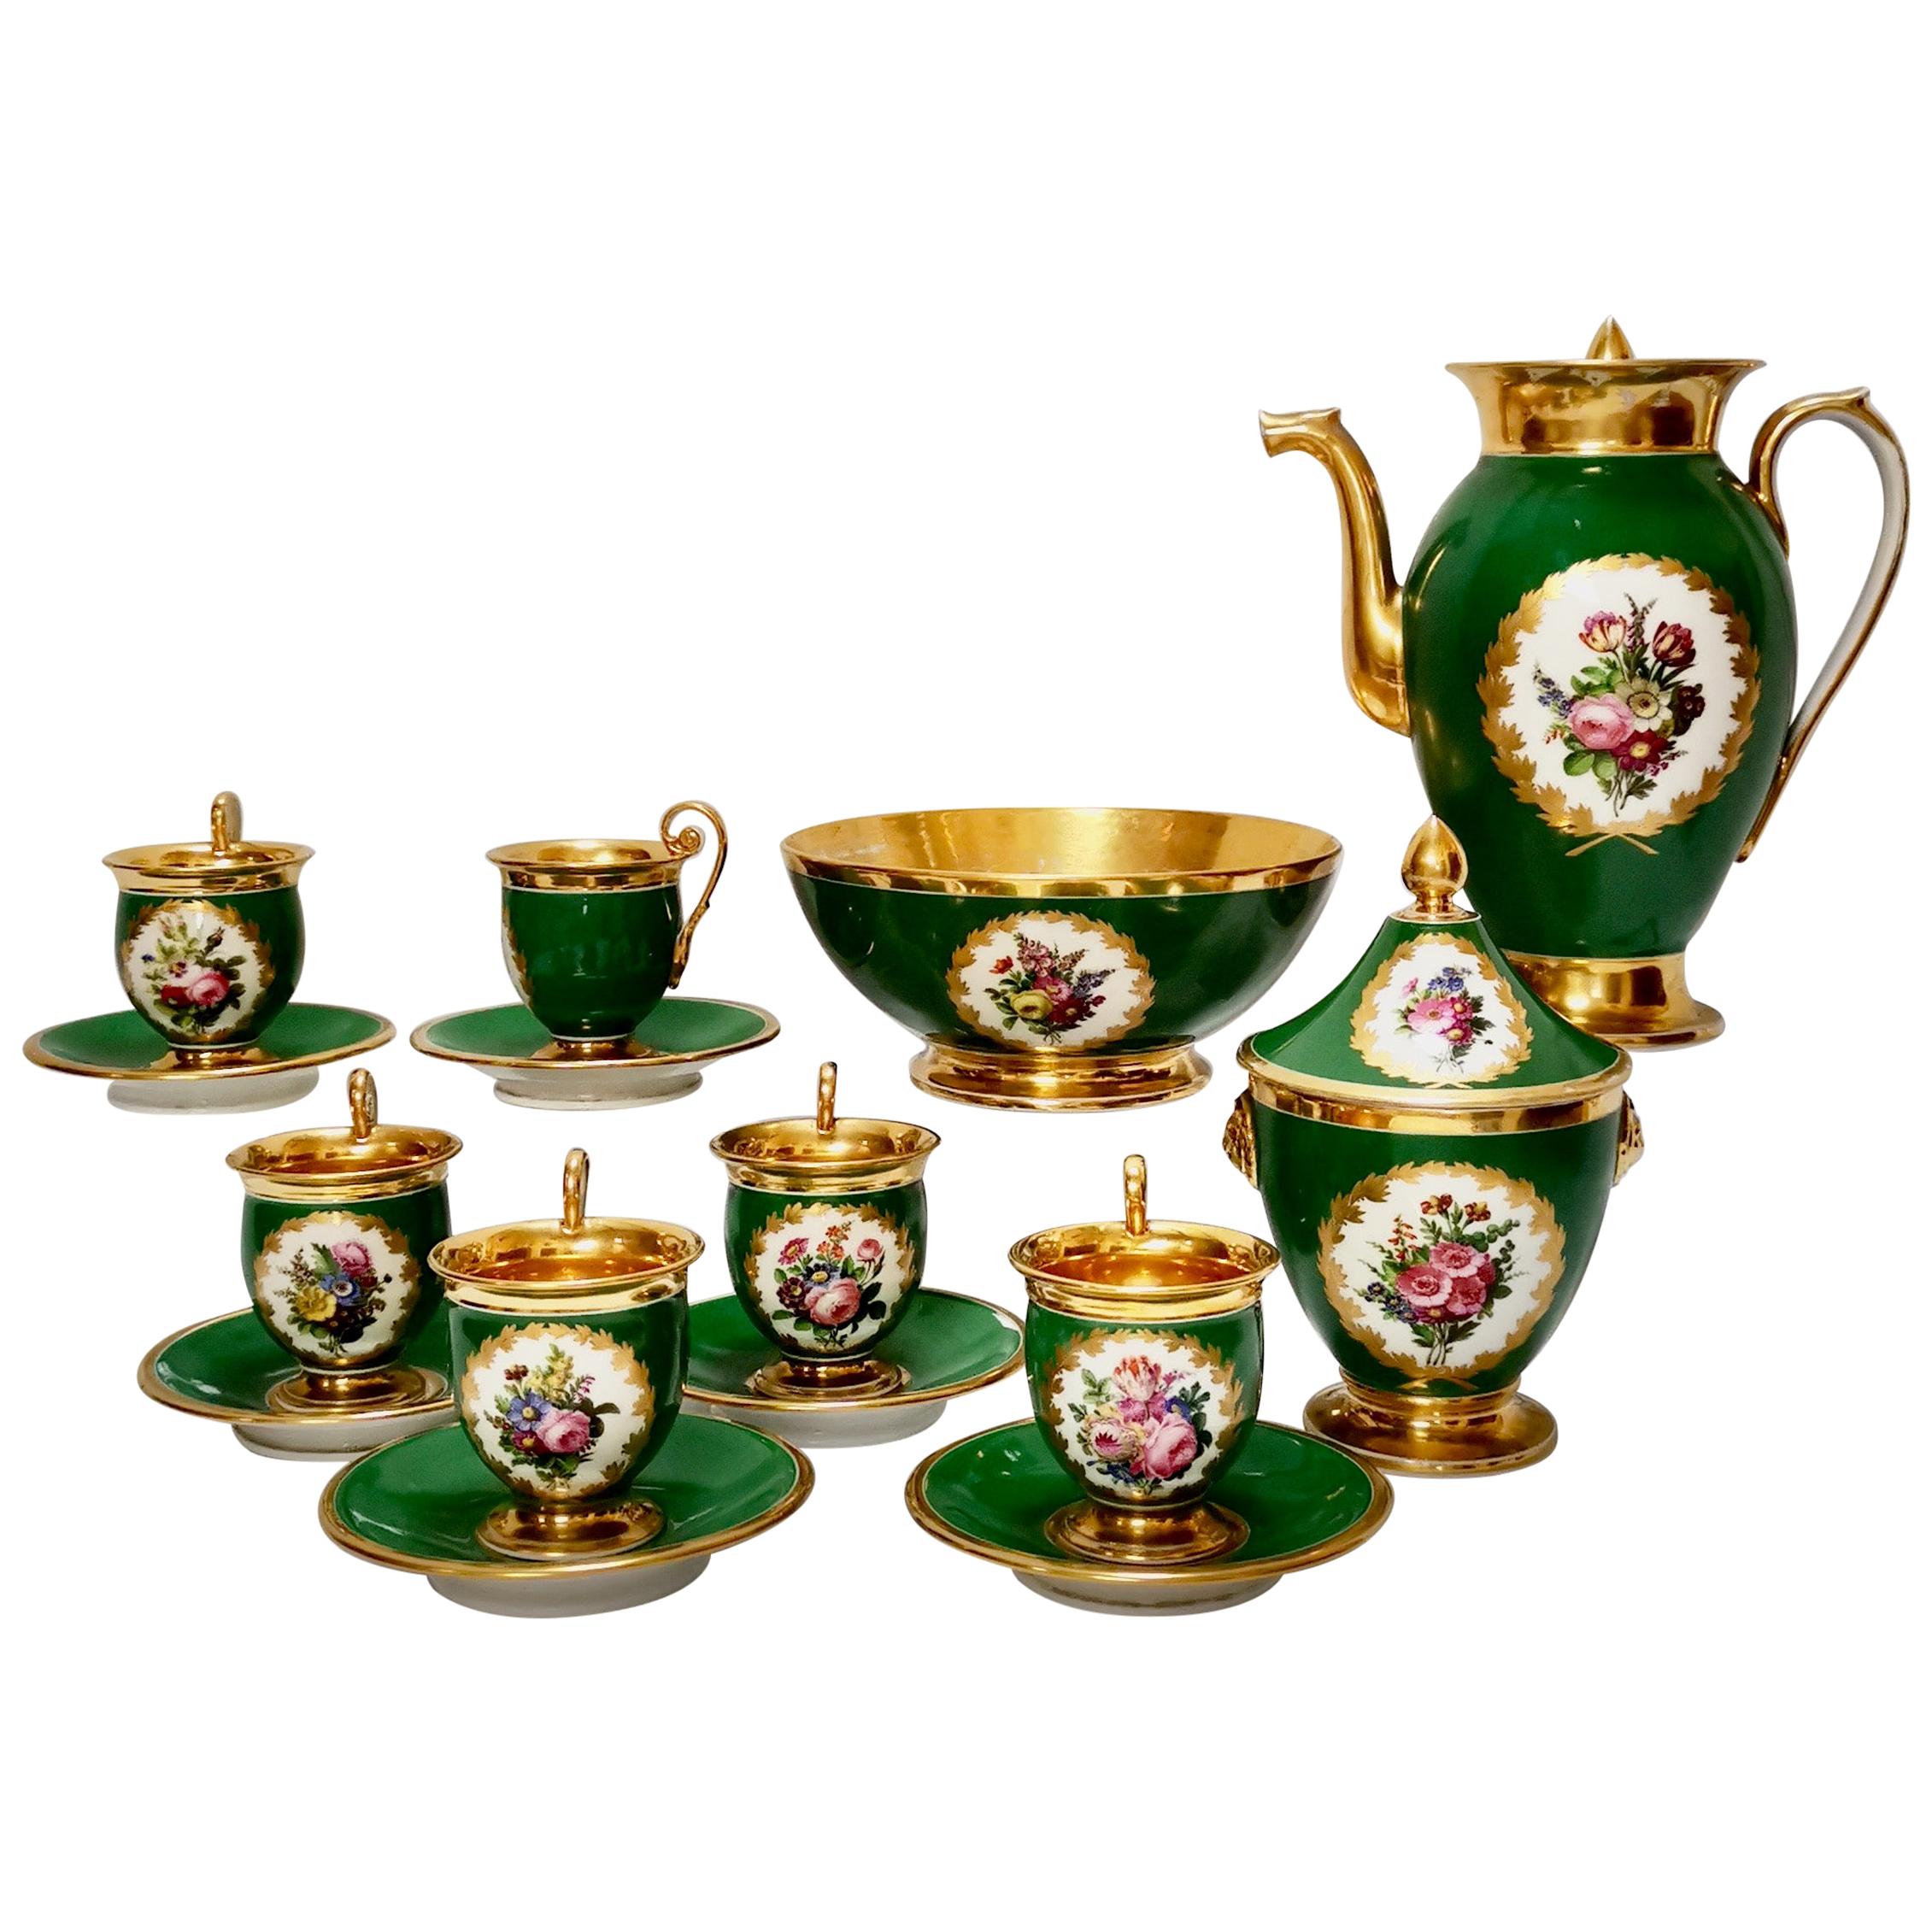 Paris Porcelain Coffee Service, Emerald Green and Floral, Empire Style ca 1820